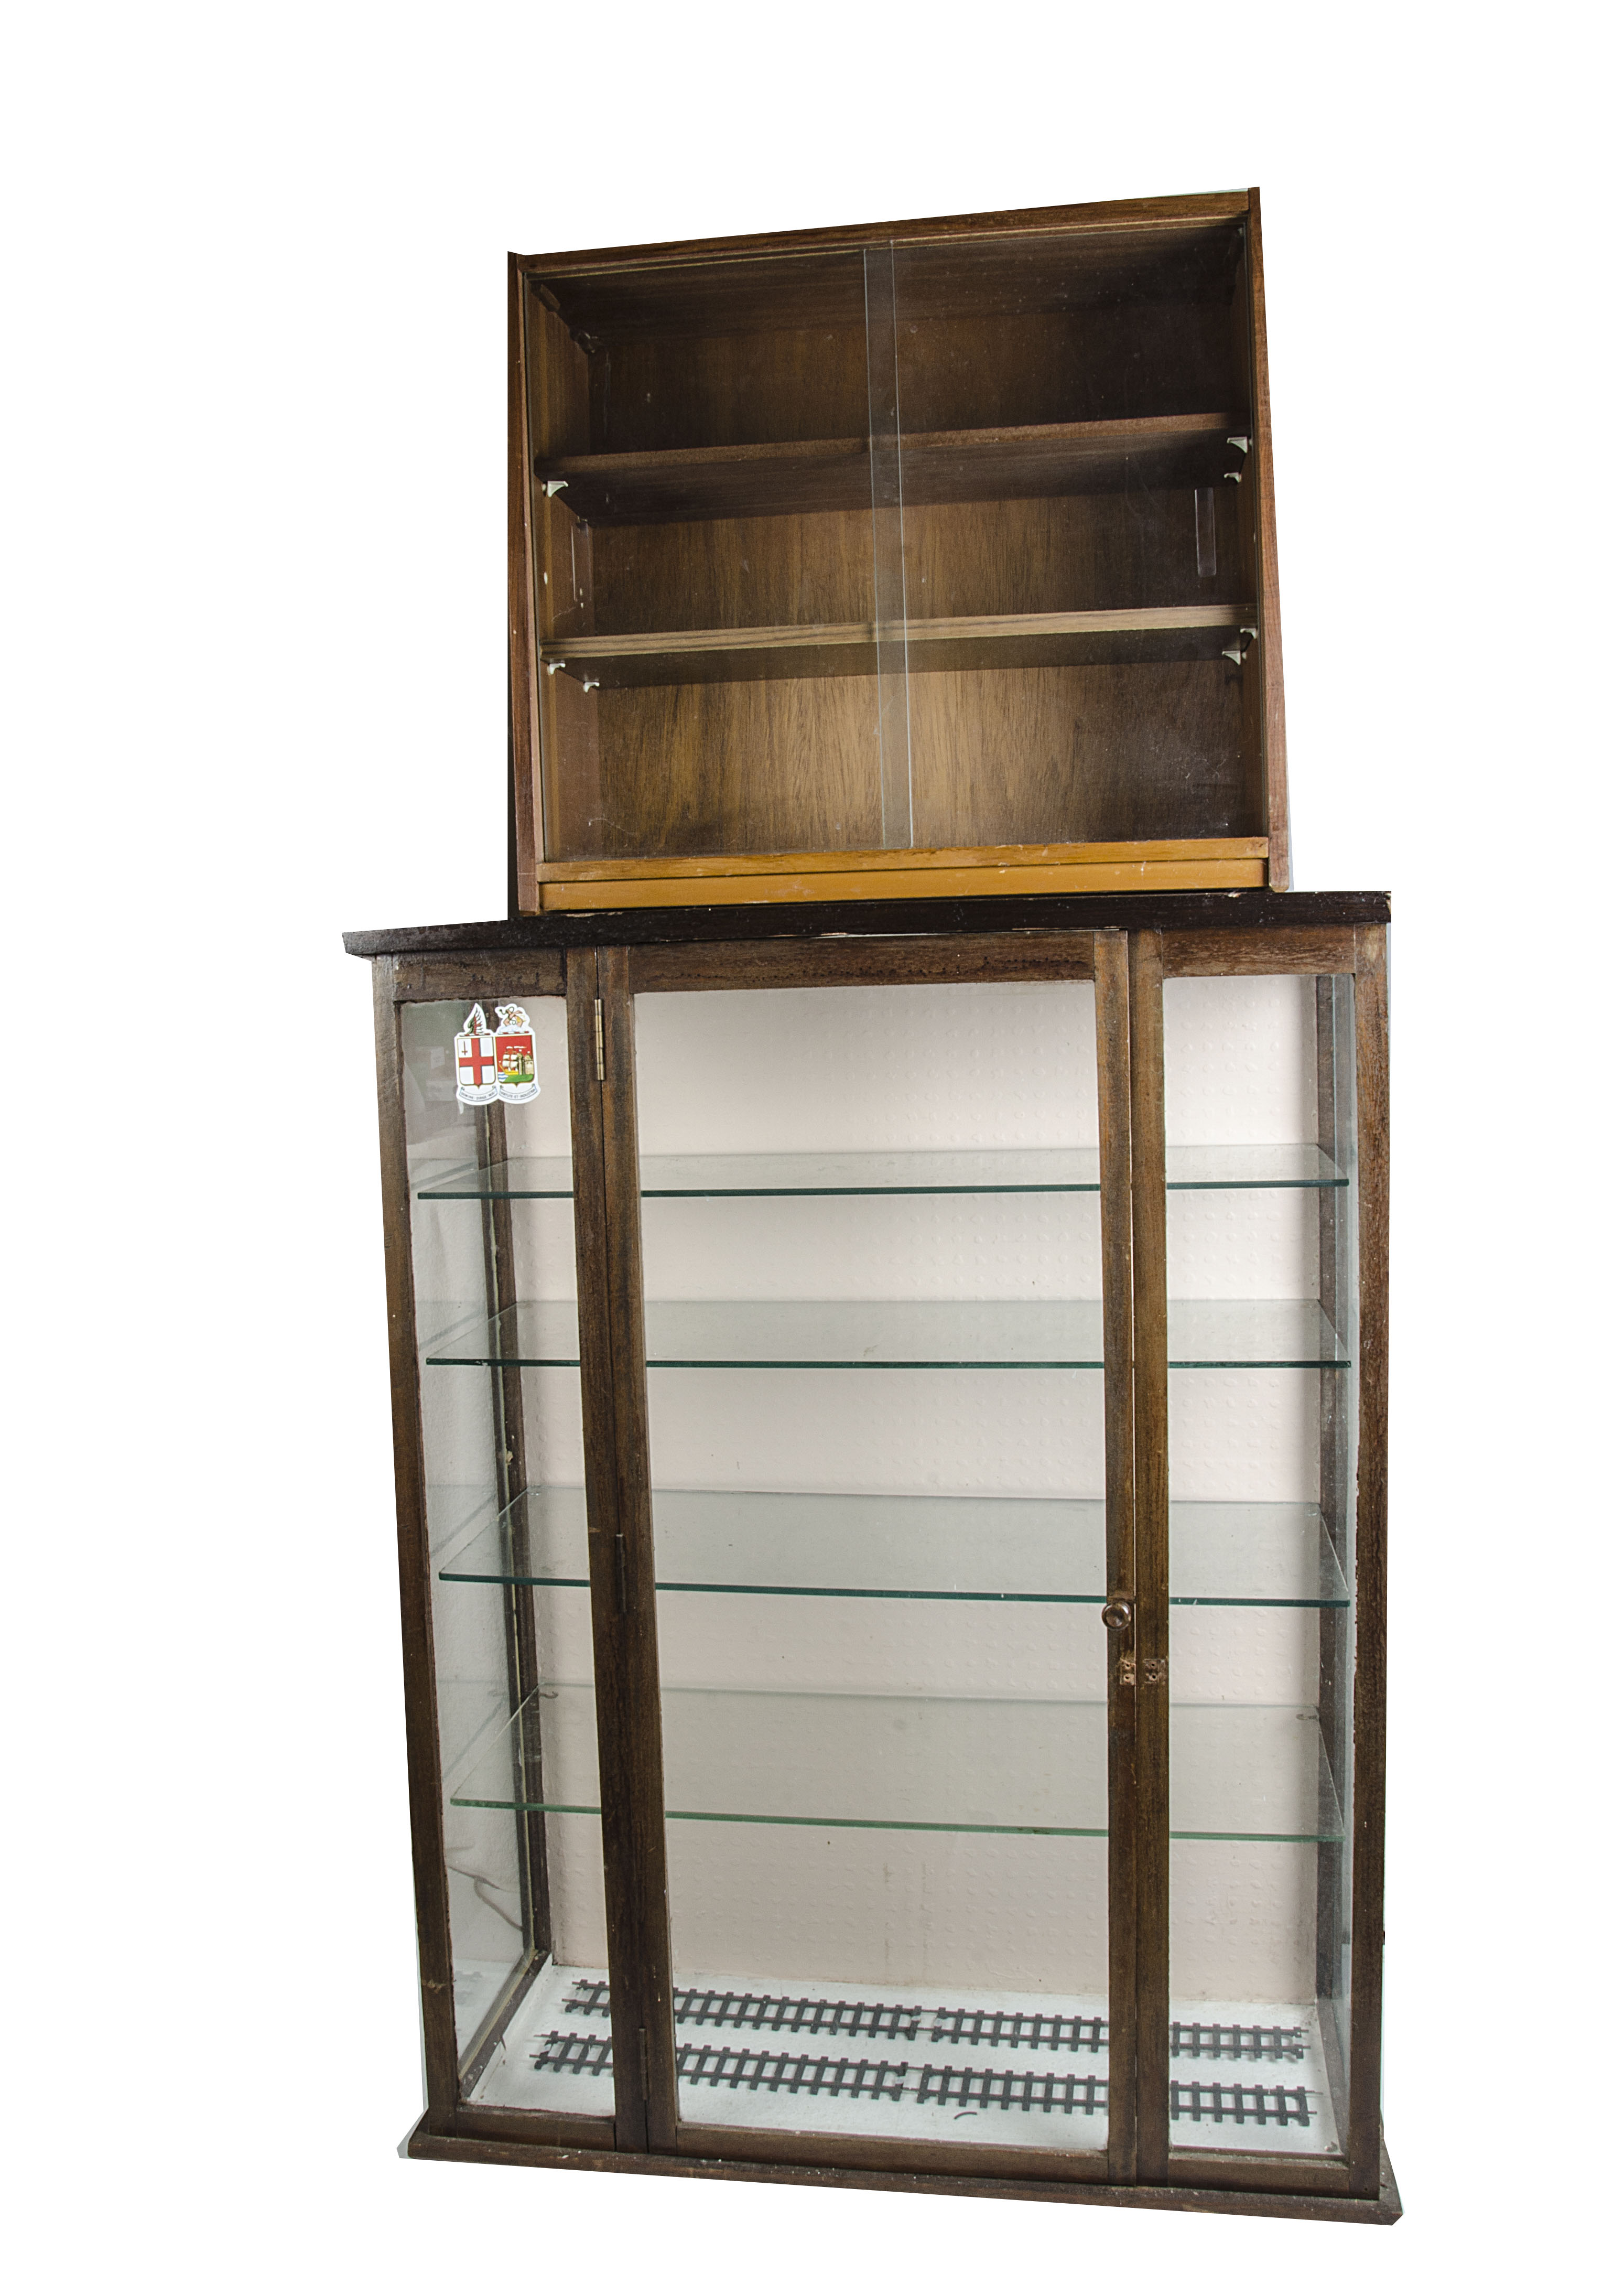 Two Collector's Display Cabinets, the larger measuring 42" high x 32" wide x 13", with 4 glass